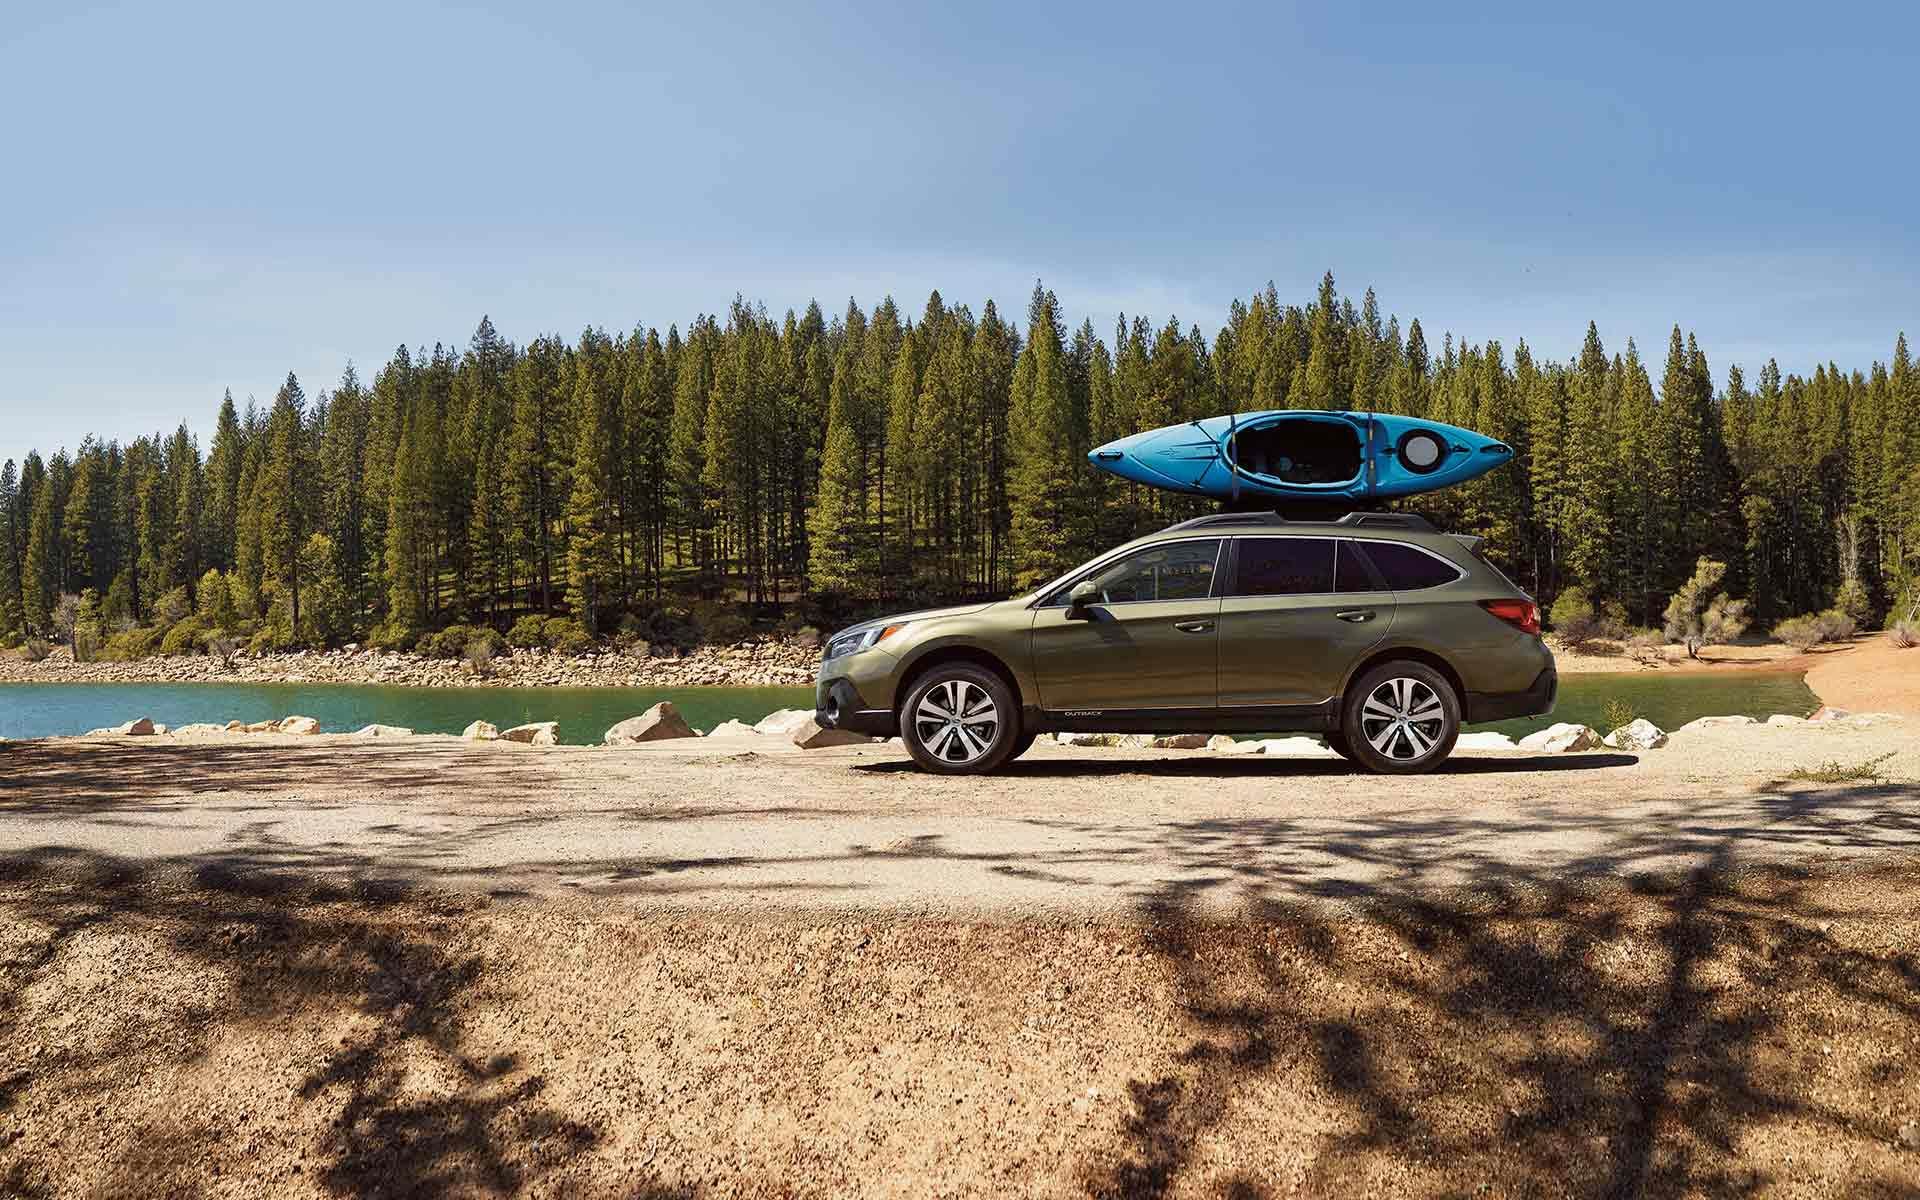 Subaru Outback with a kayak on the roof parked in front of trees